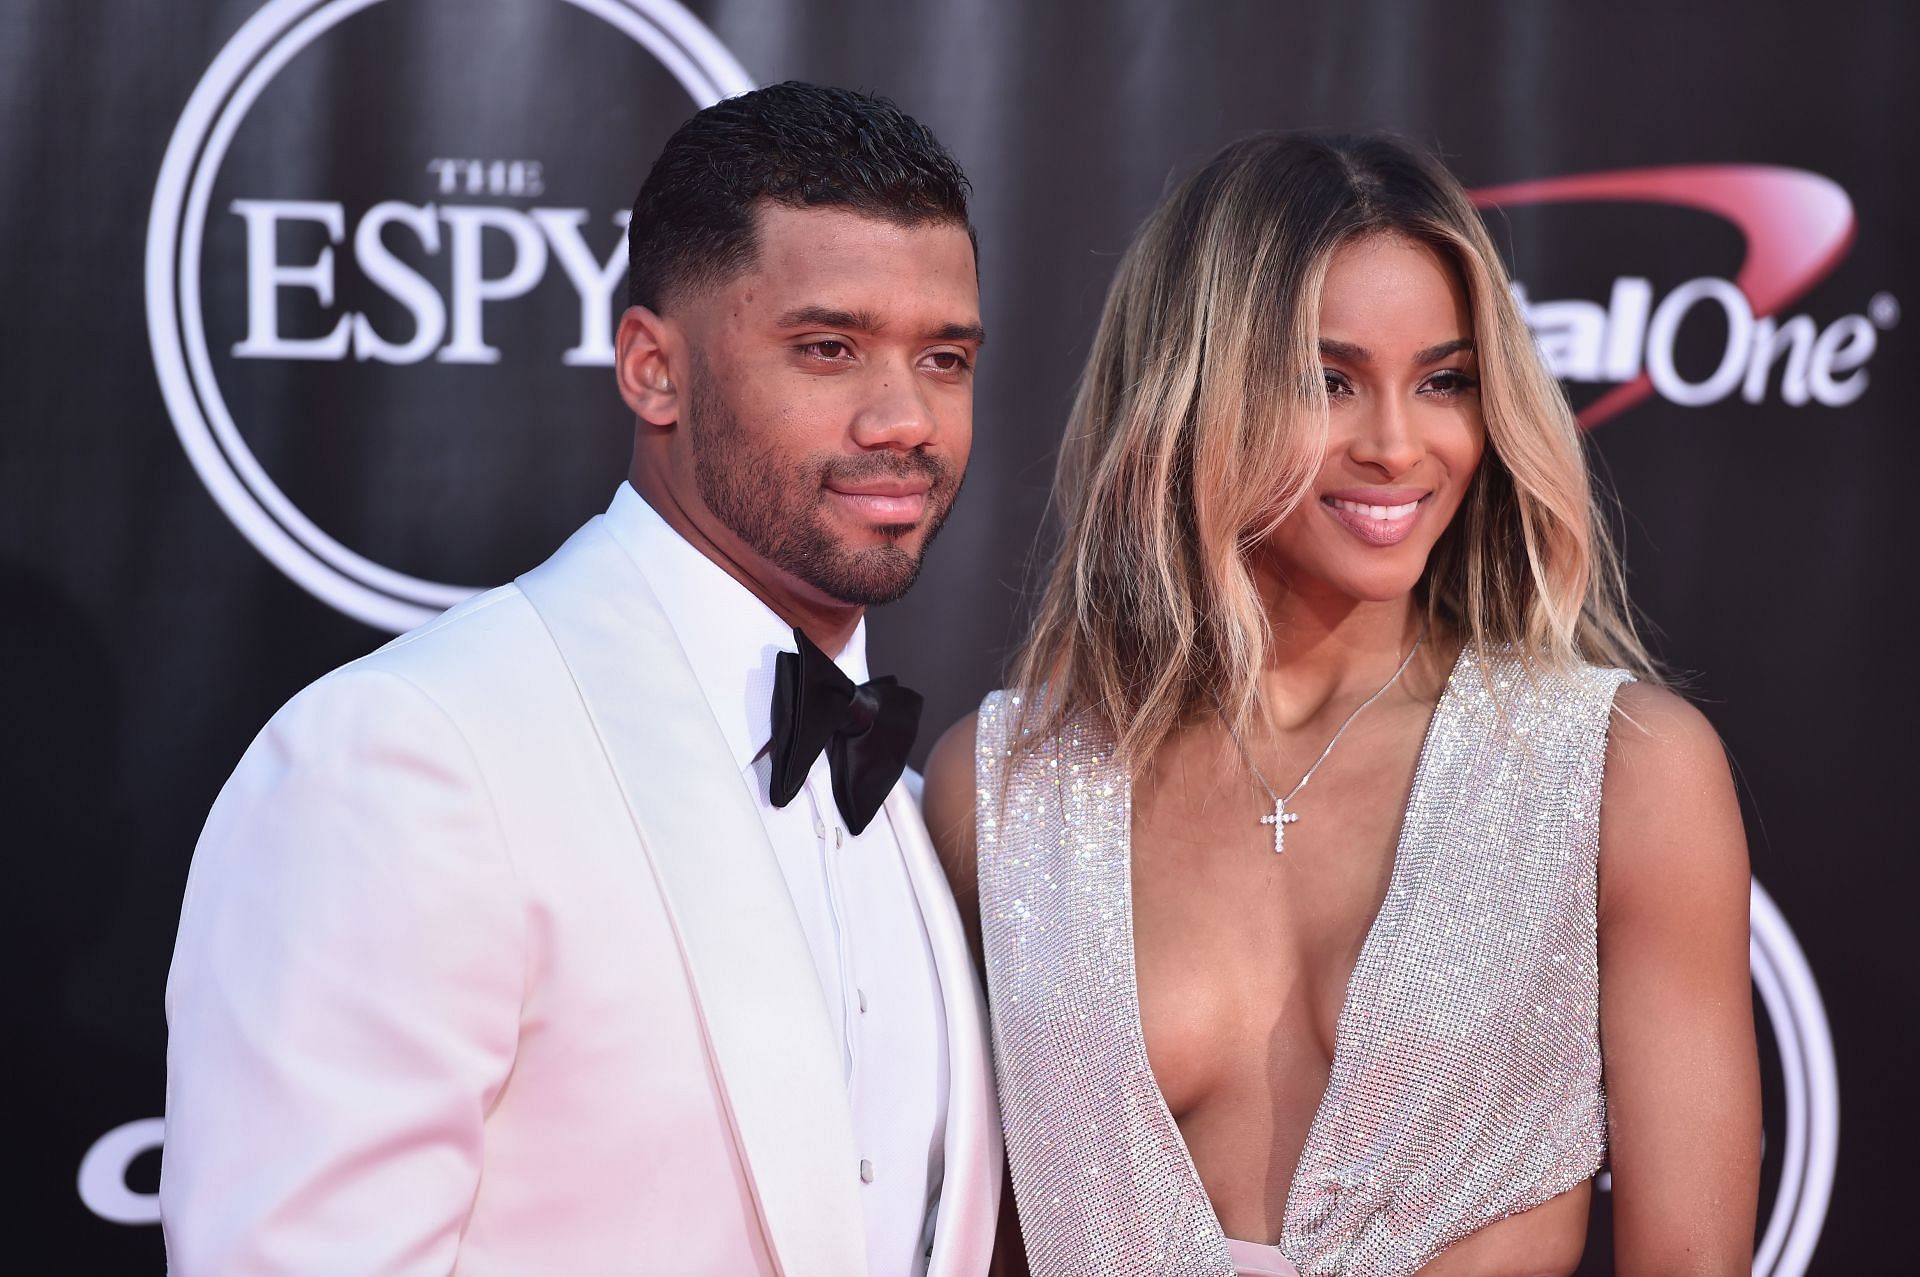 Russell Wilson and Ciara at The 2016 ESPYS - Arrivals